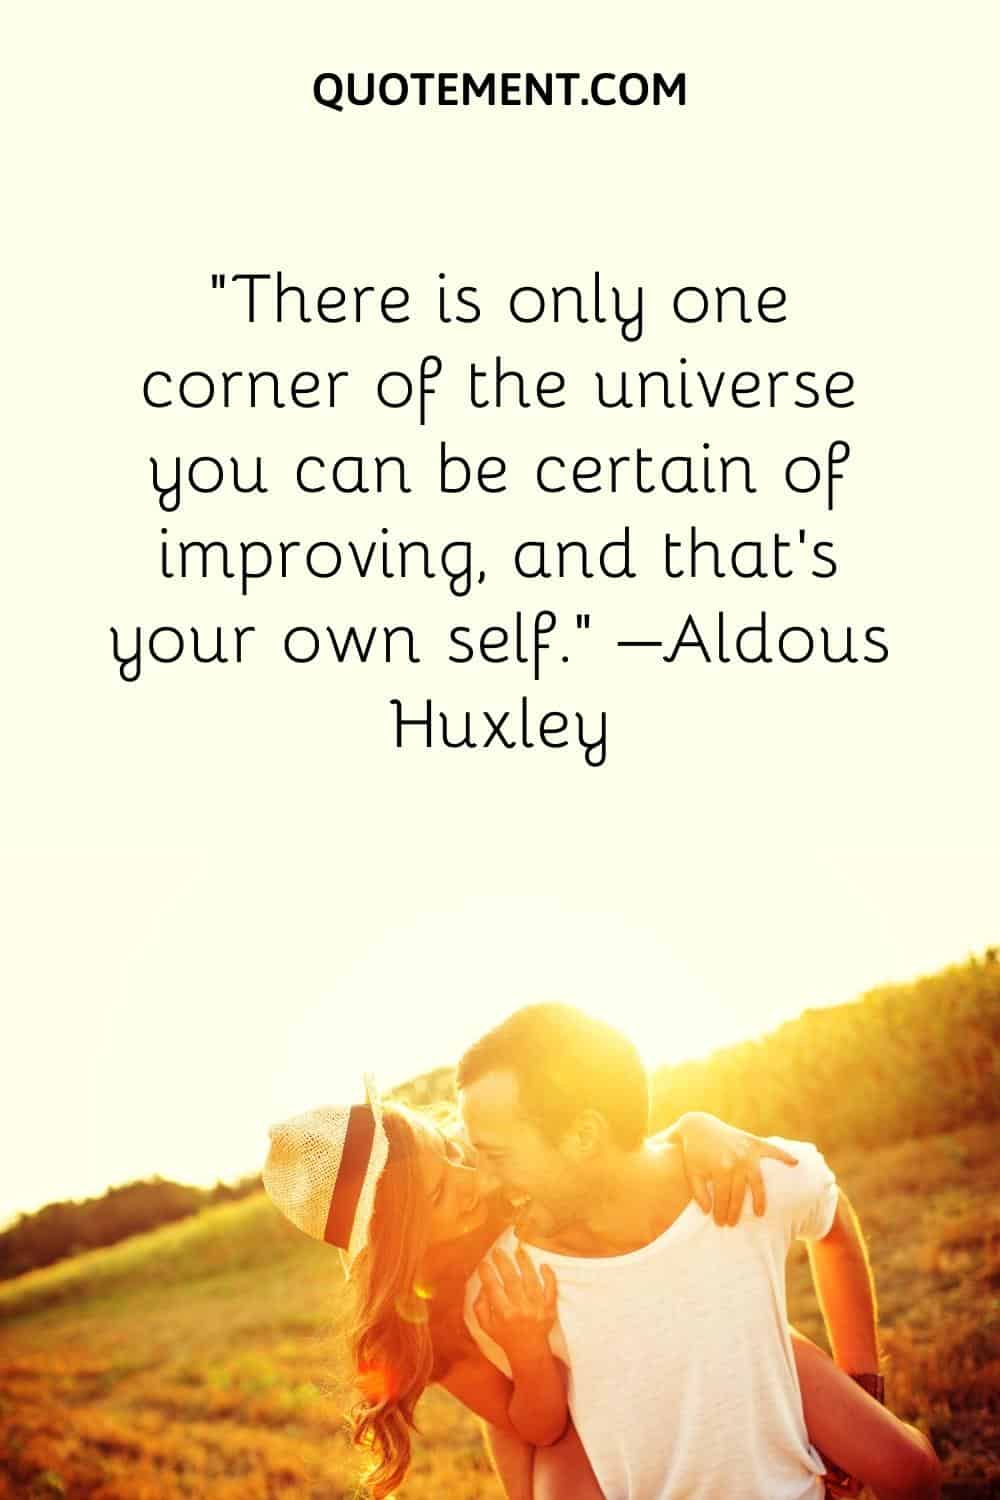 There is only one corner of the universe you can be certain of improving